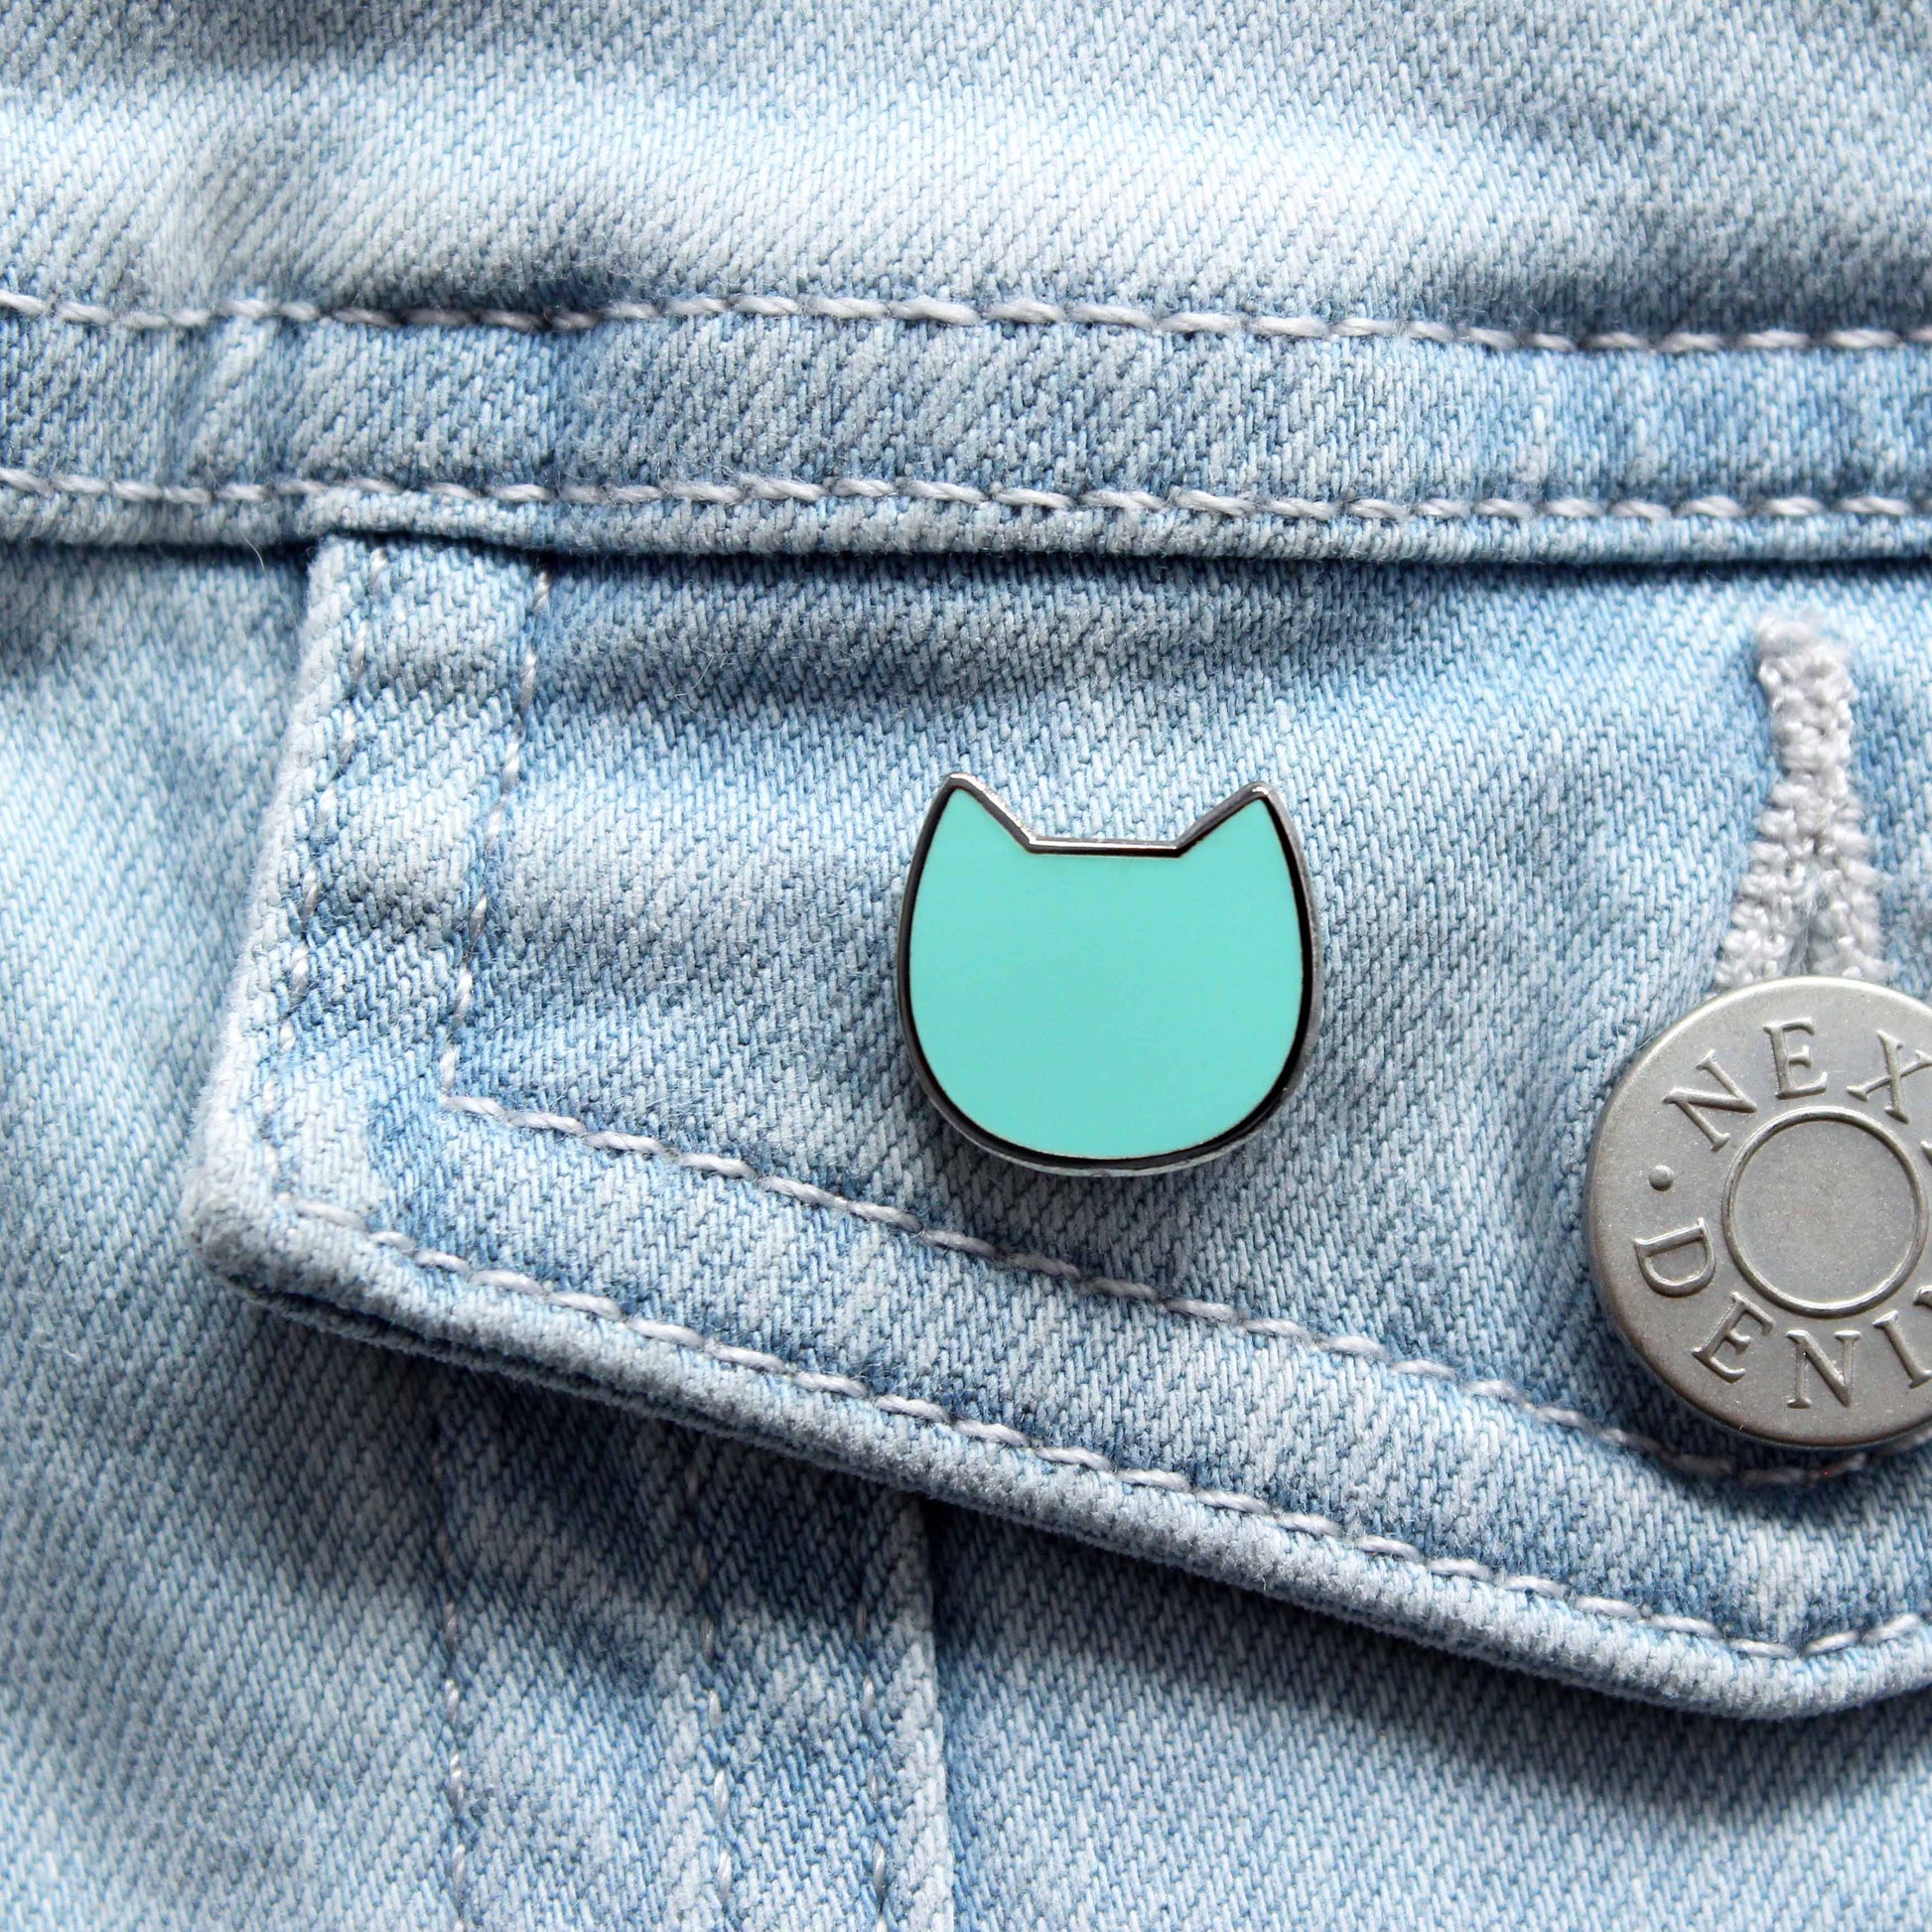 Turquoise mini cat pin badges from Purple Tree Designs